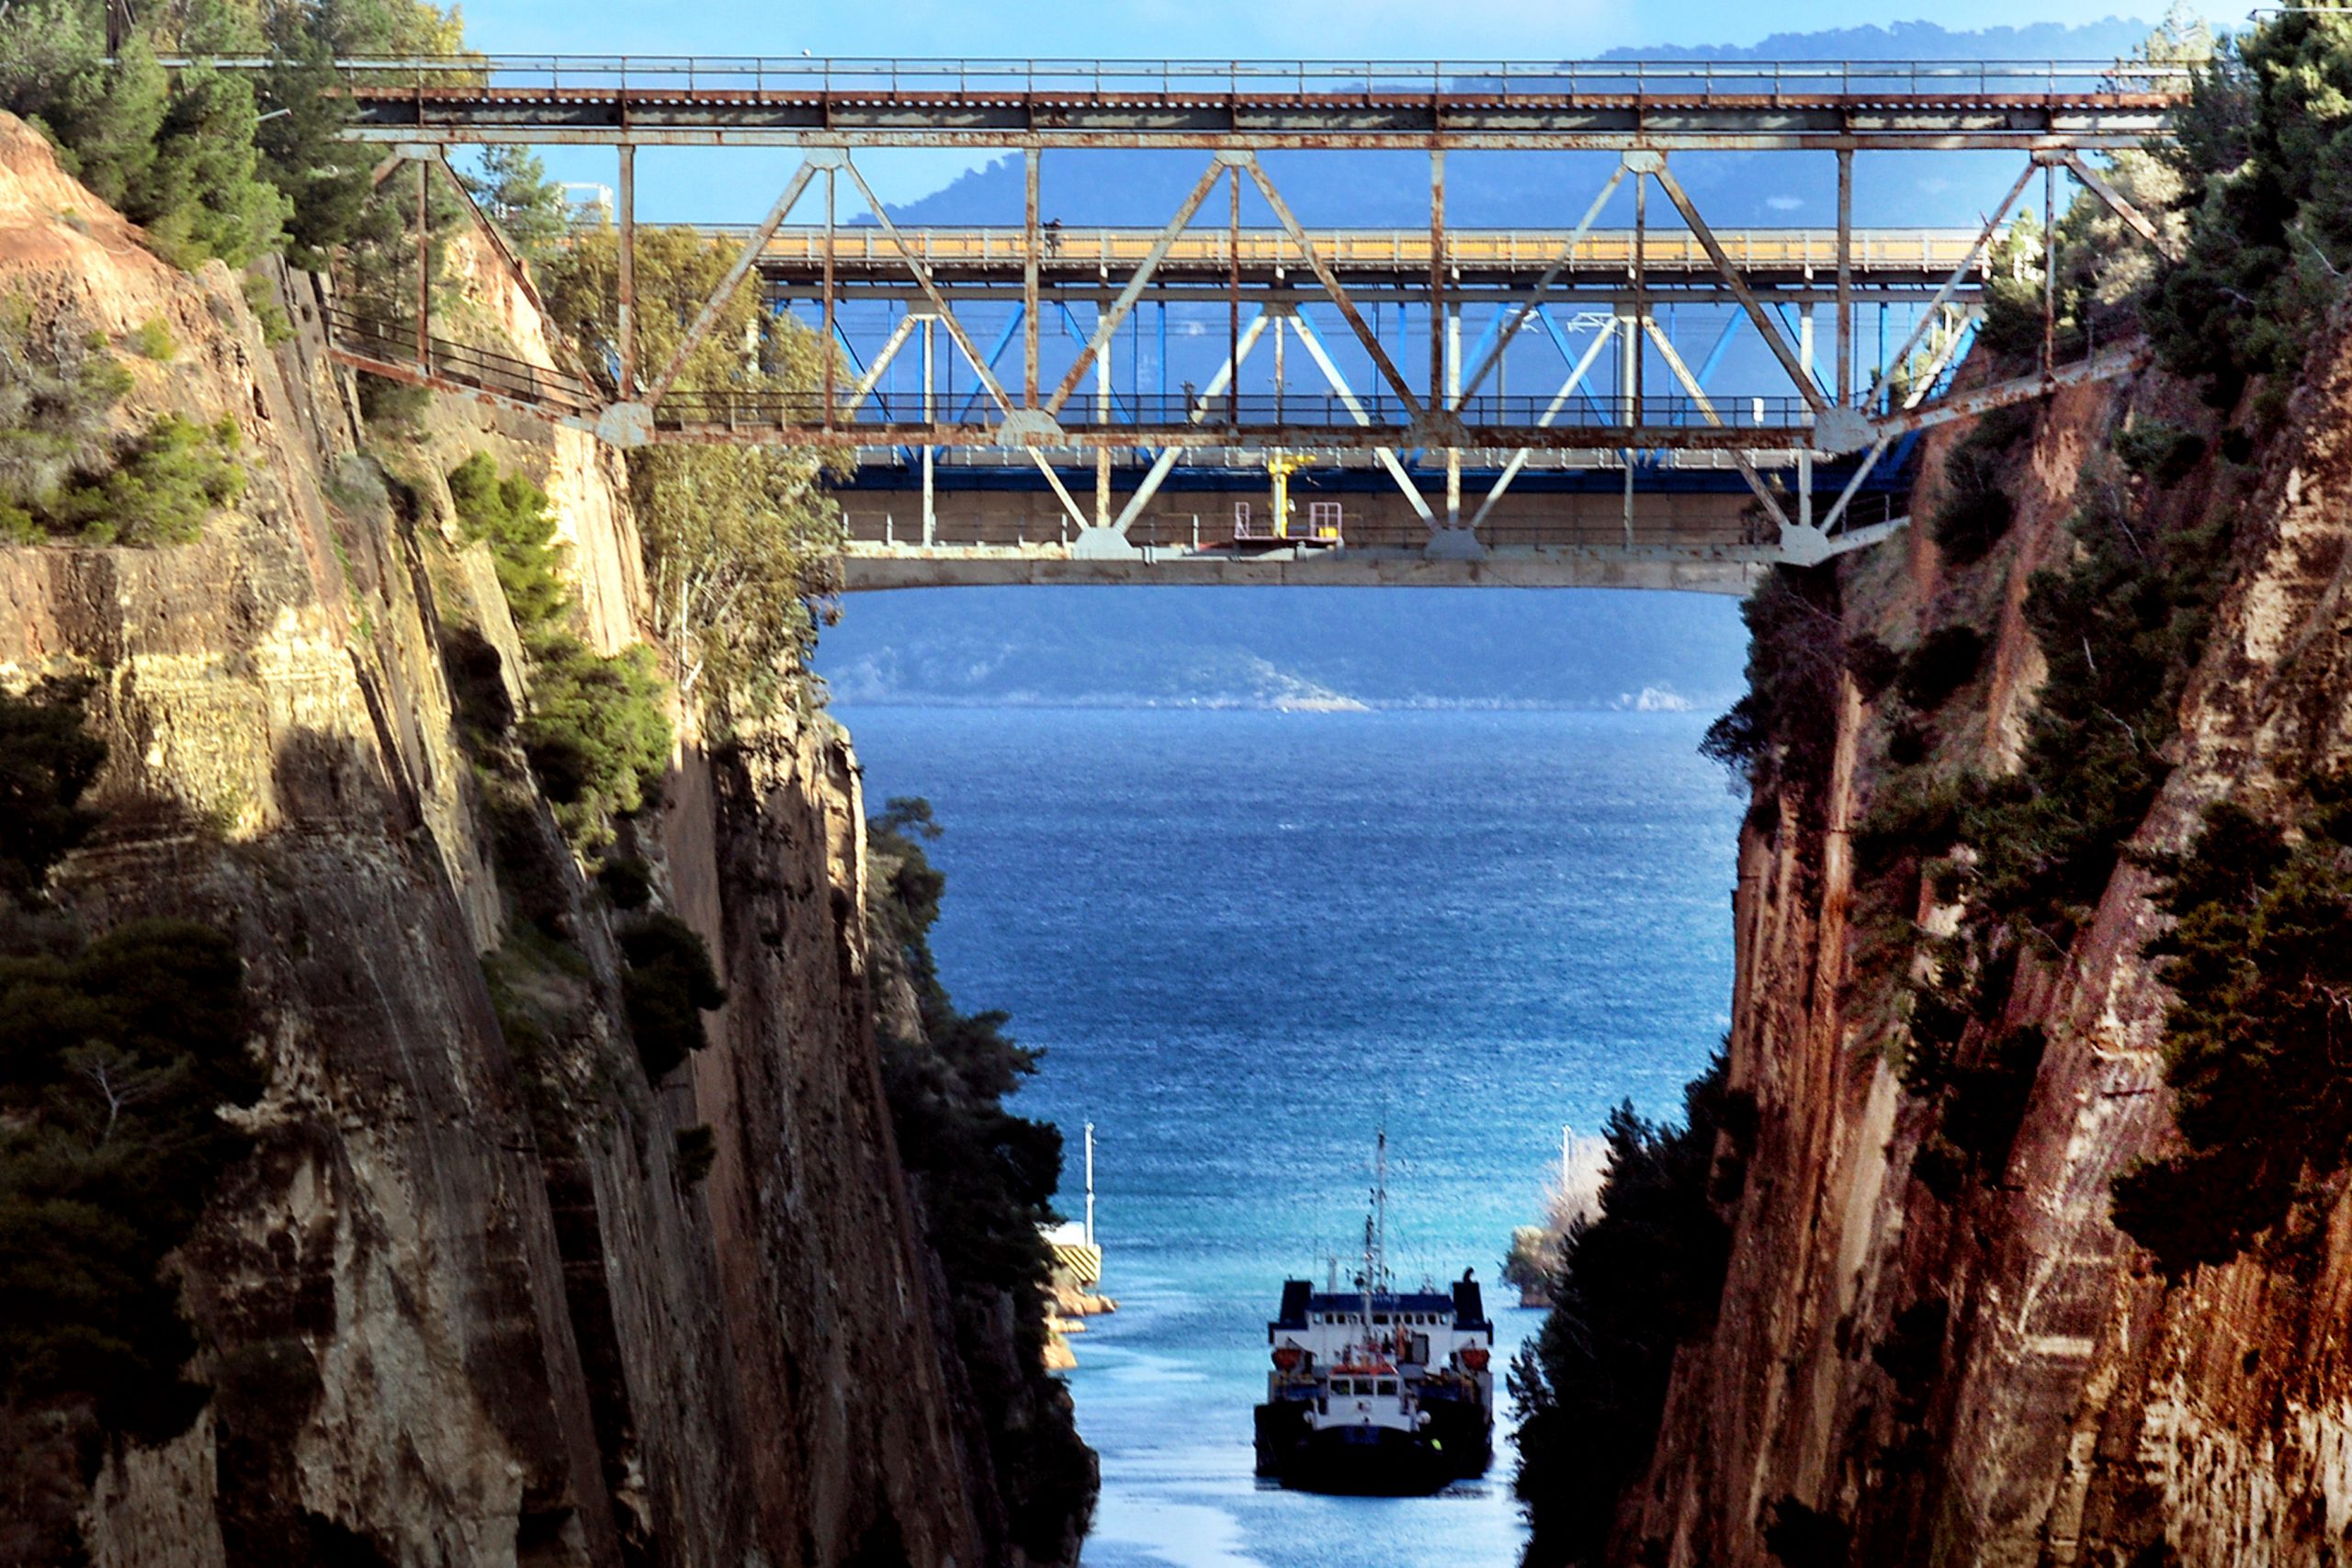 Corinth Canal: Over 1,700 crossings in one month after reopening